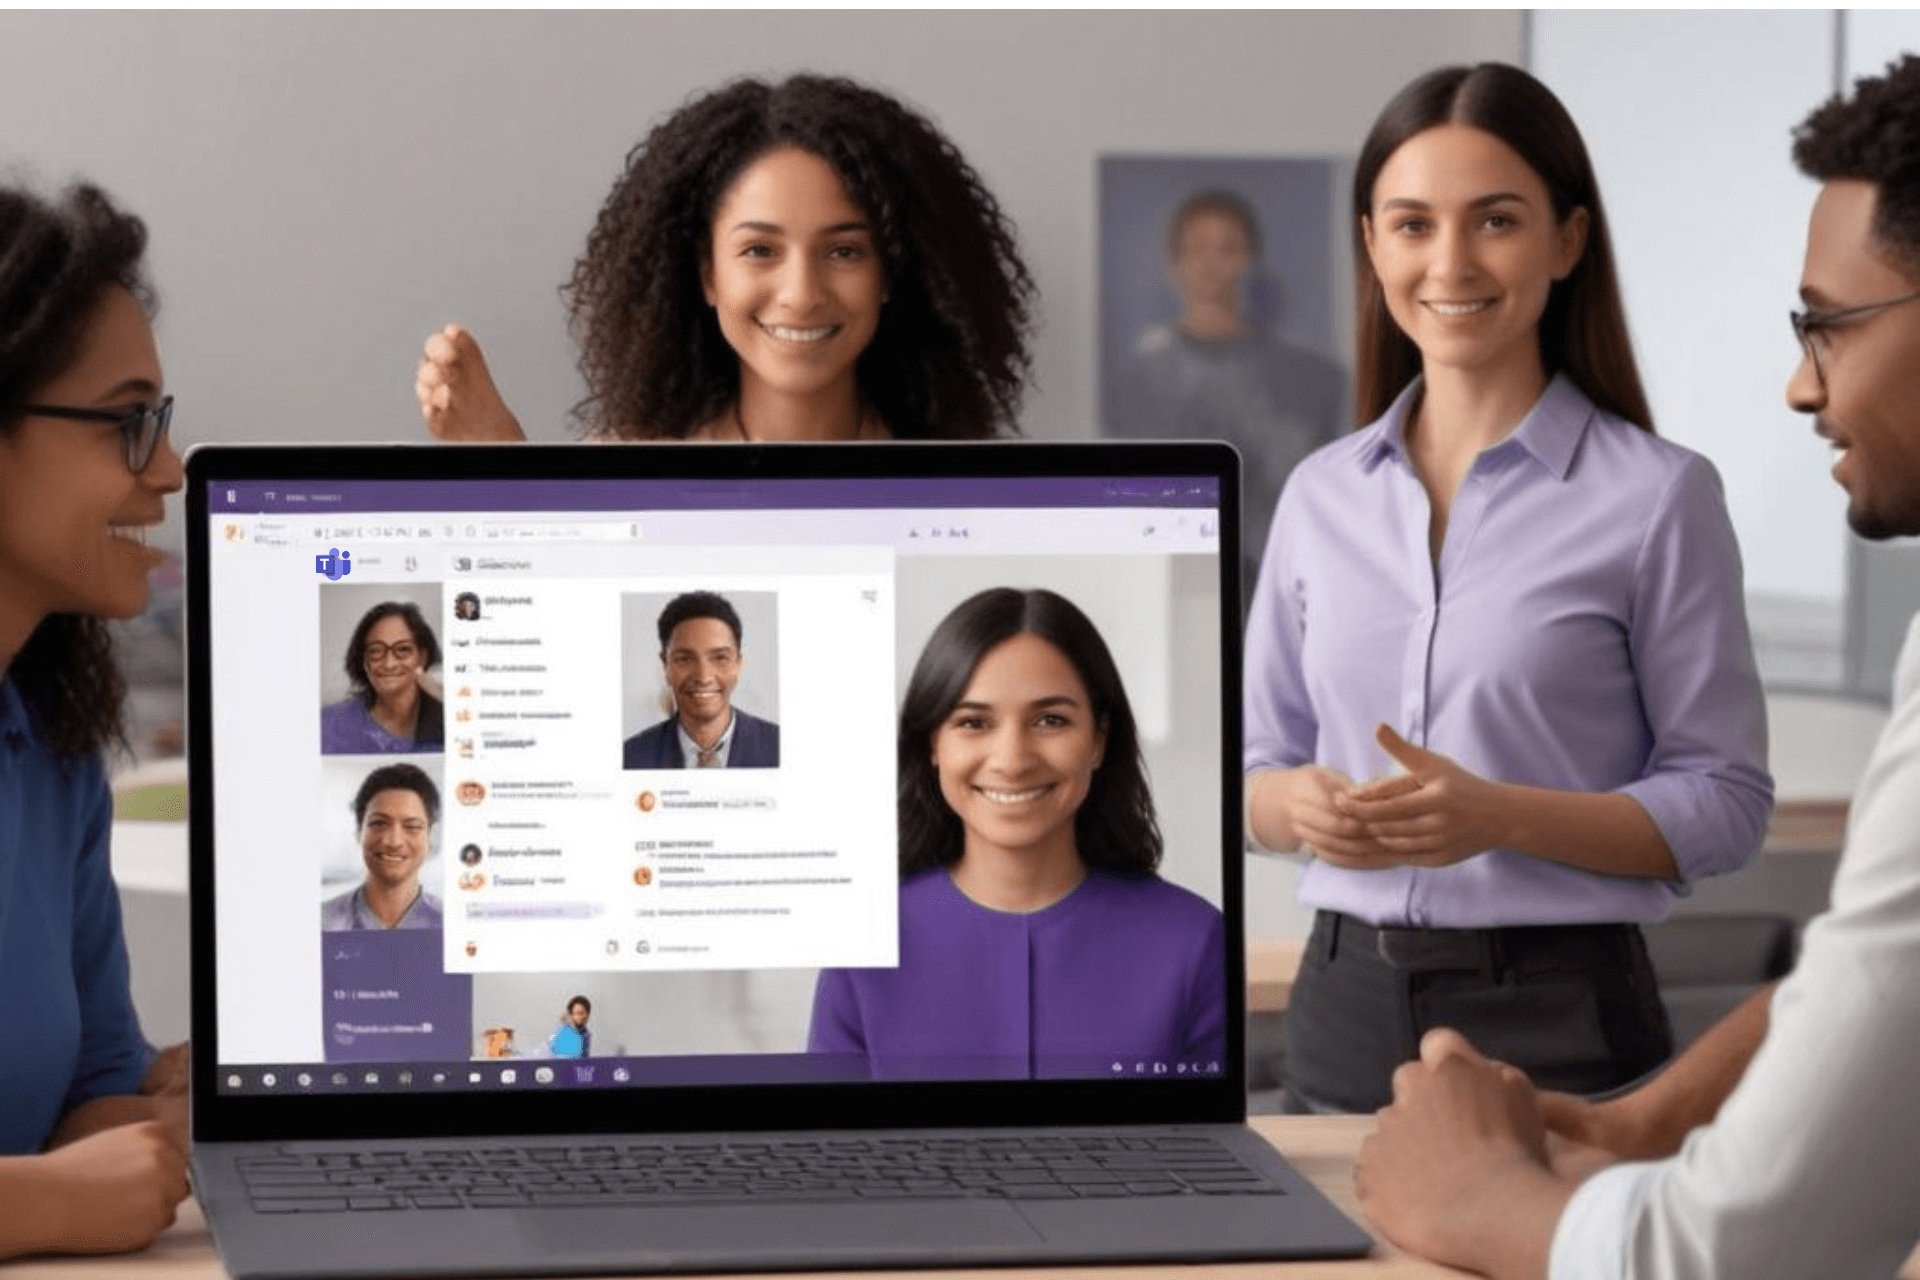 Microsoft Teams will soon come with the ability to export Q&A